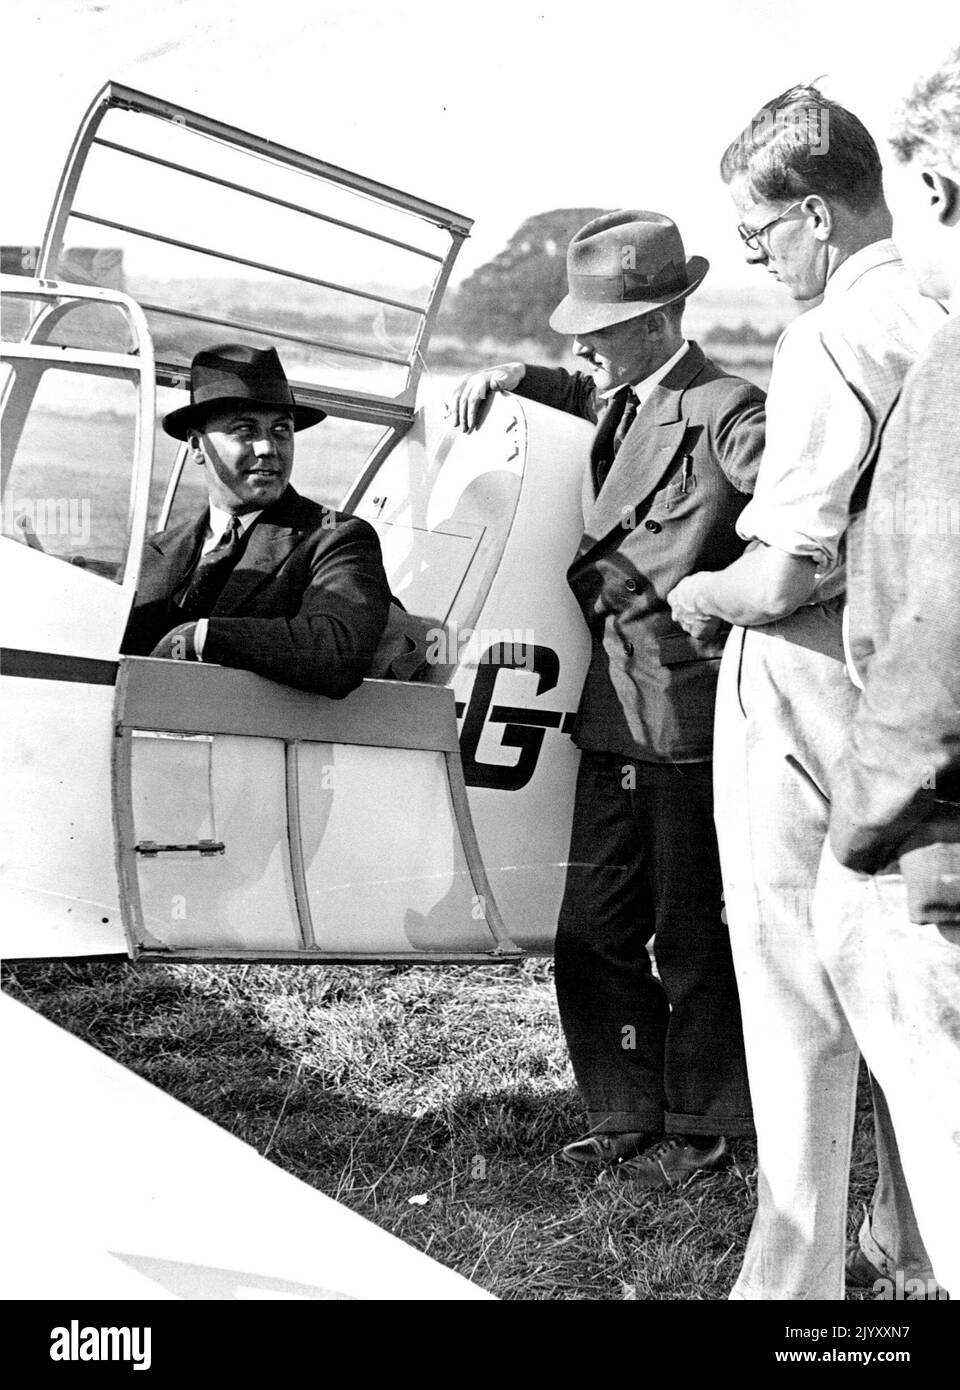 ***** For King's Cup Air Race Percival, who is flying the Viscountess Wakefield of Hythe's 'Percival 'Mew Gull' in the Air Race, talking to advisers about the plane, at Luton Aerodrome. October 18, 1937. (Photo by LNA). Stock Photo